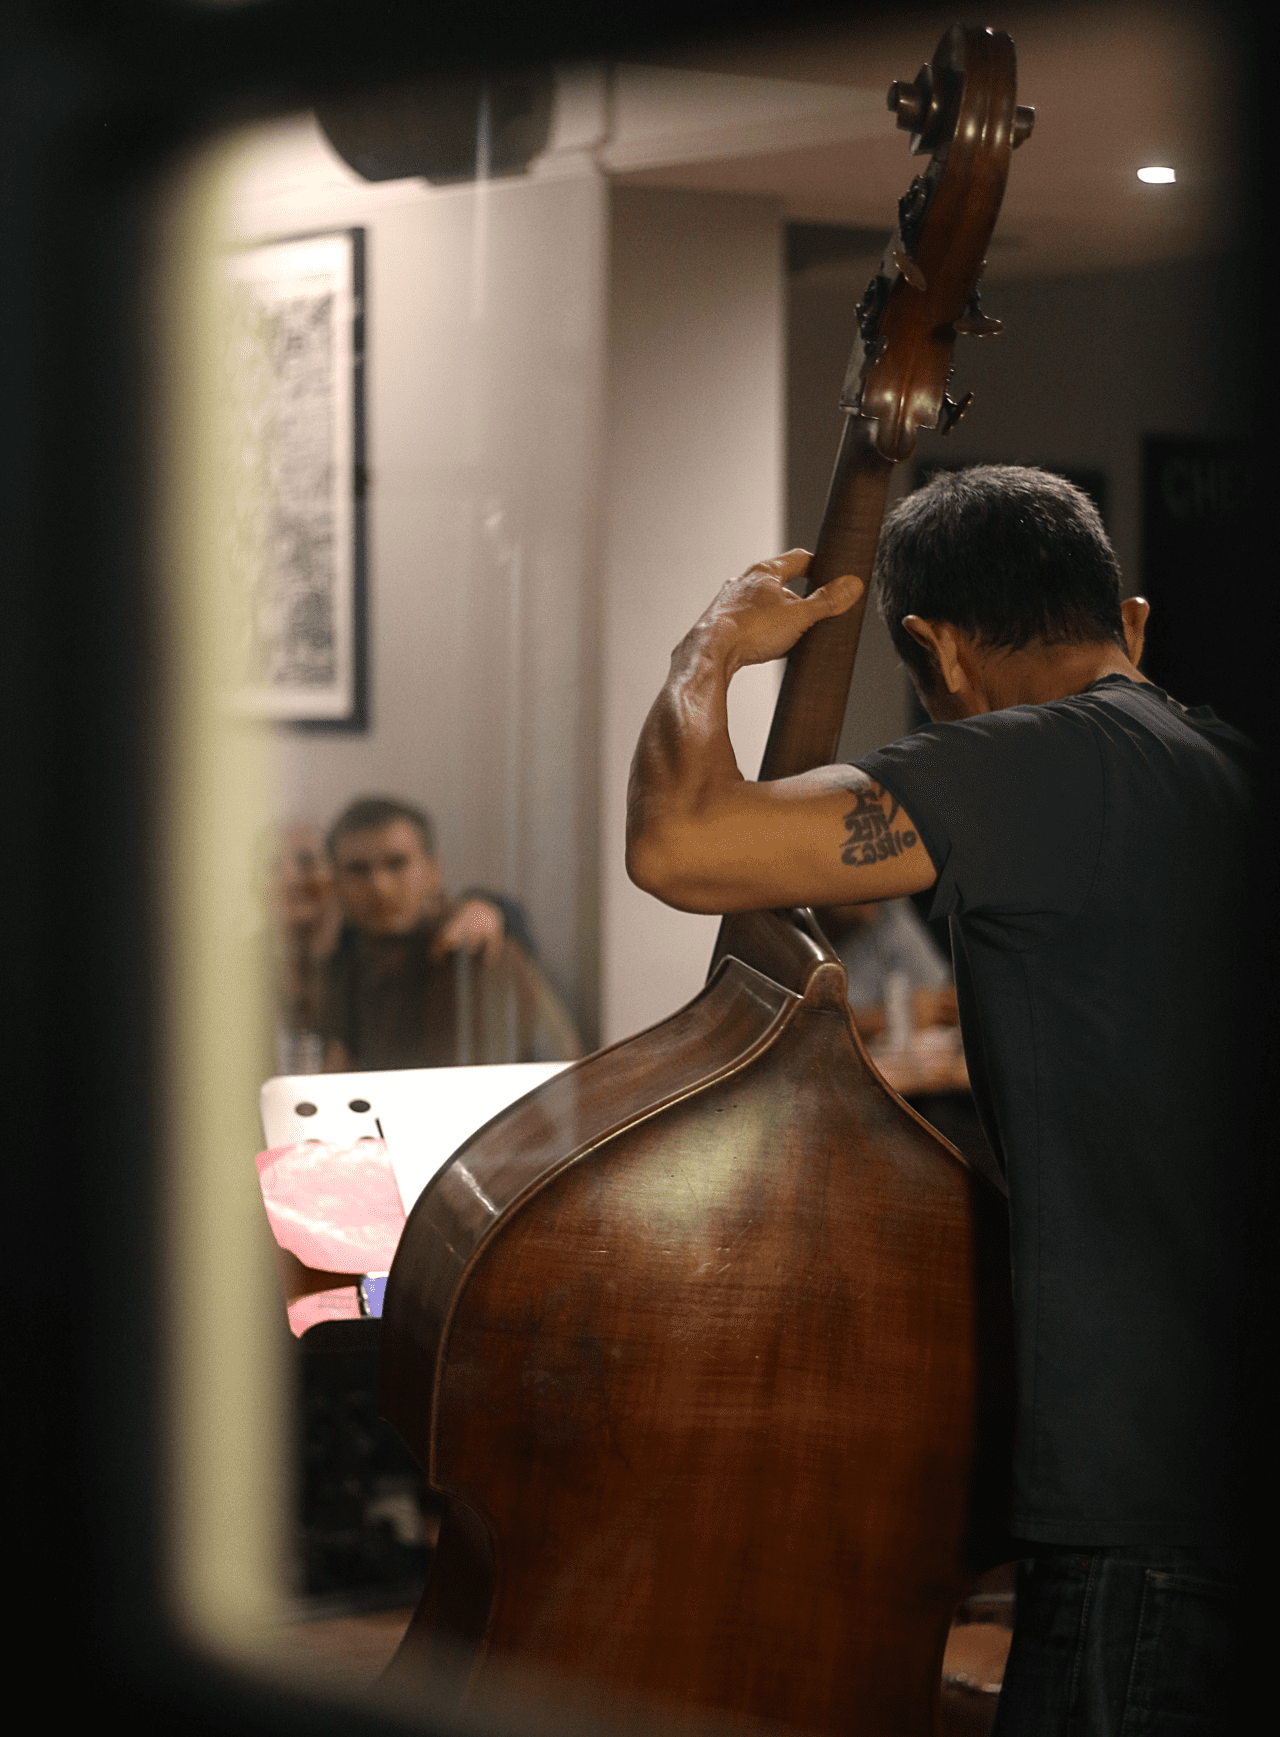 The best restaurants in Brixton, South London | A double bass player performing at Effra Hall Tavern in Brixton